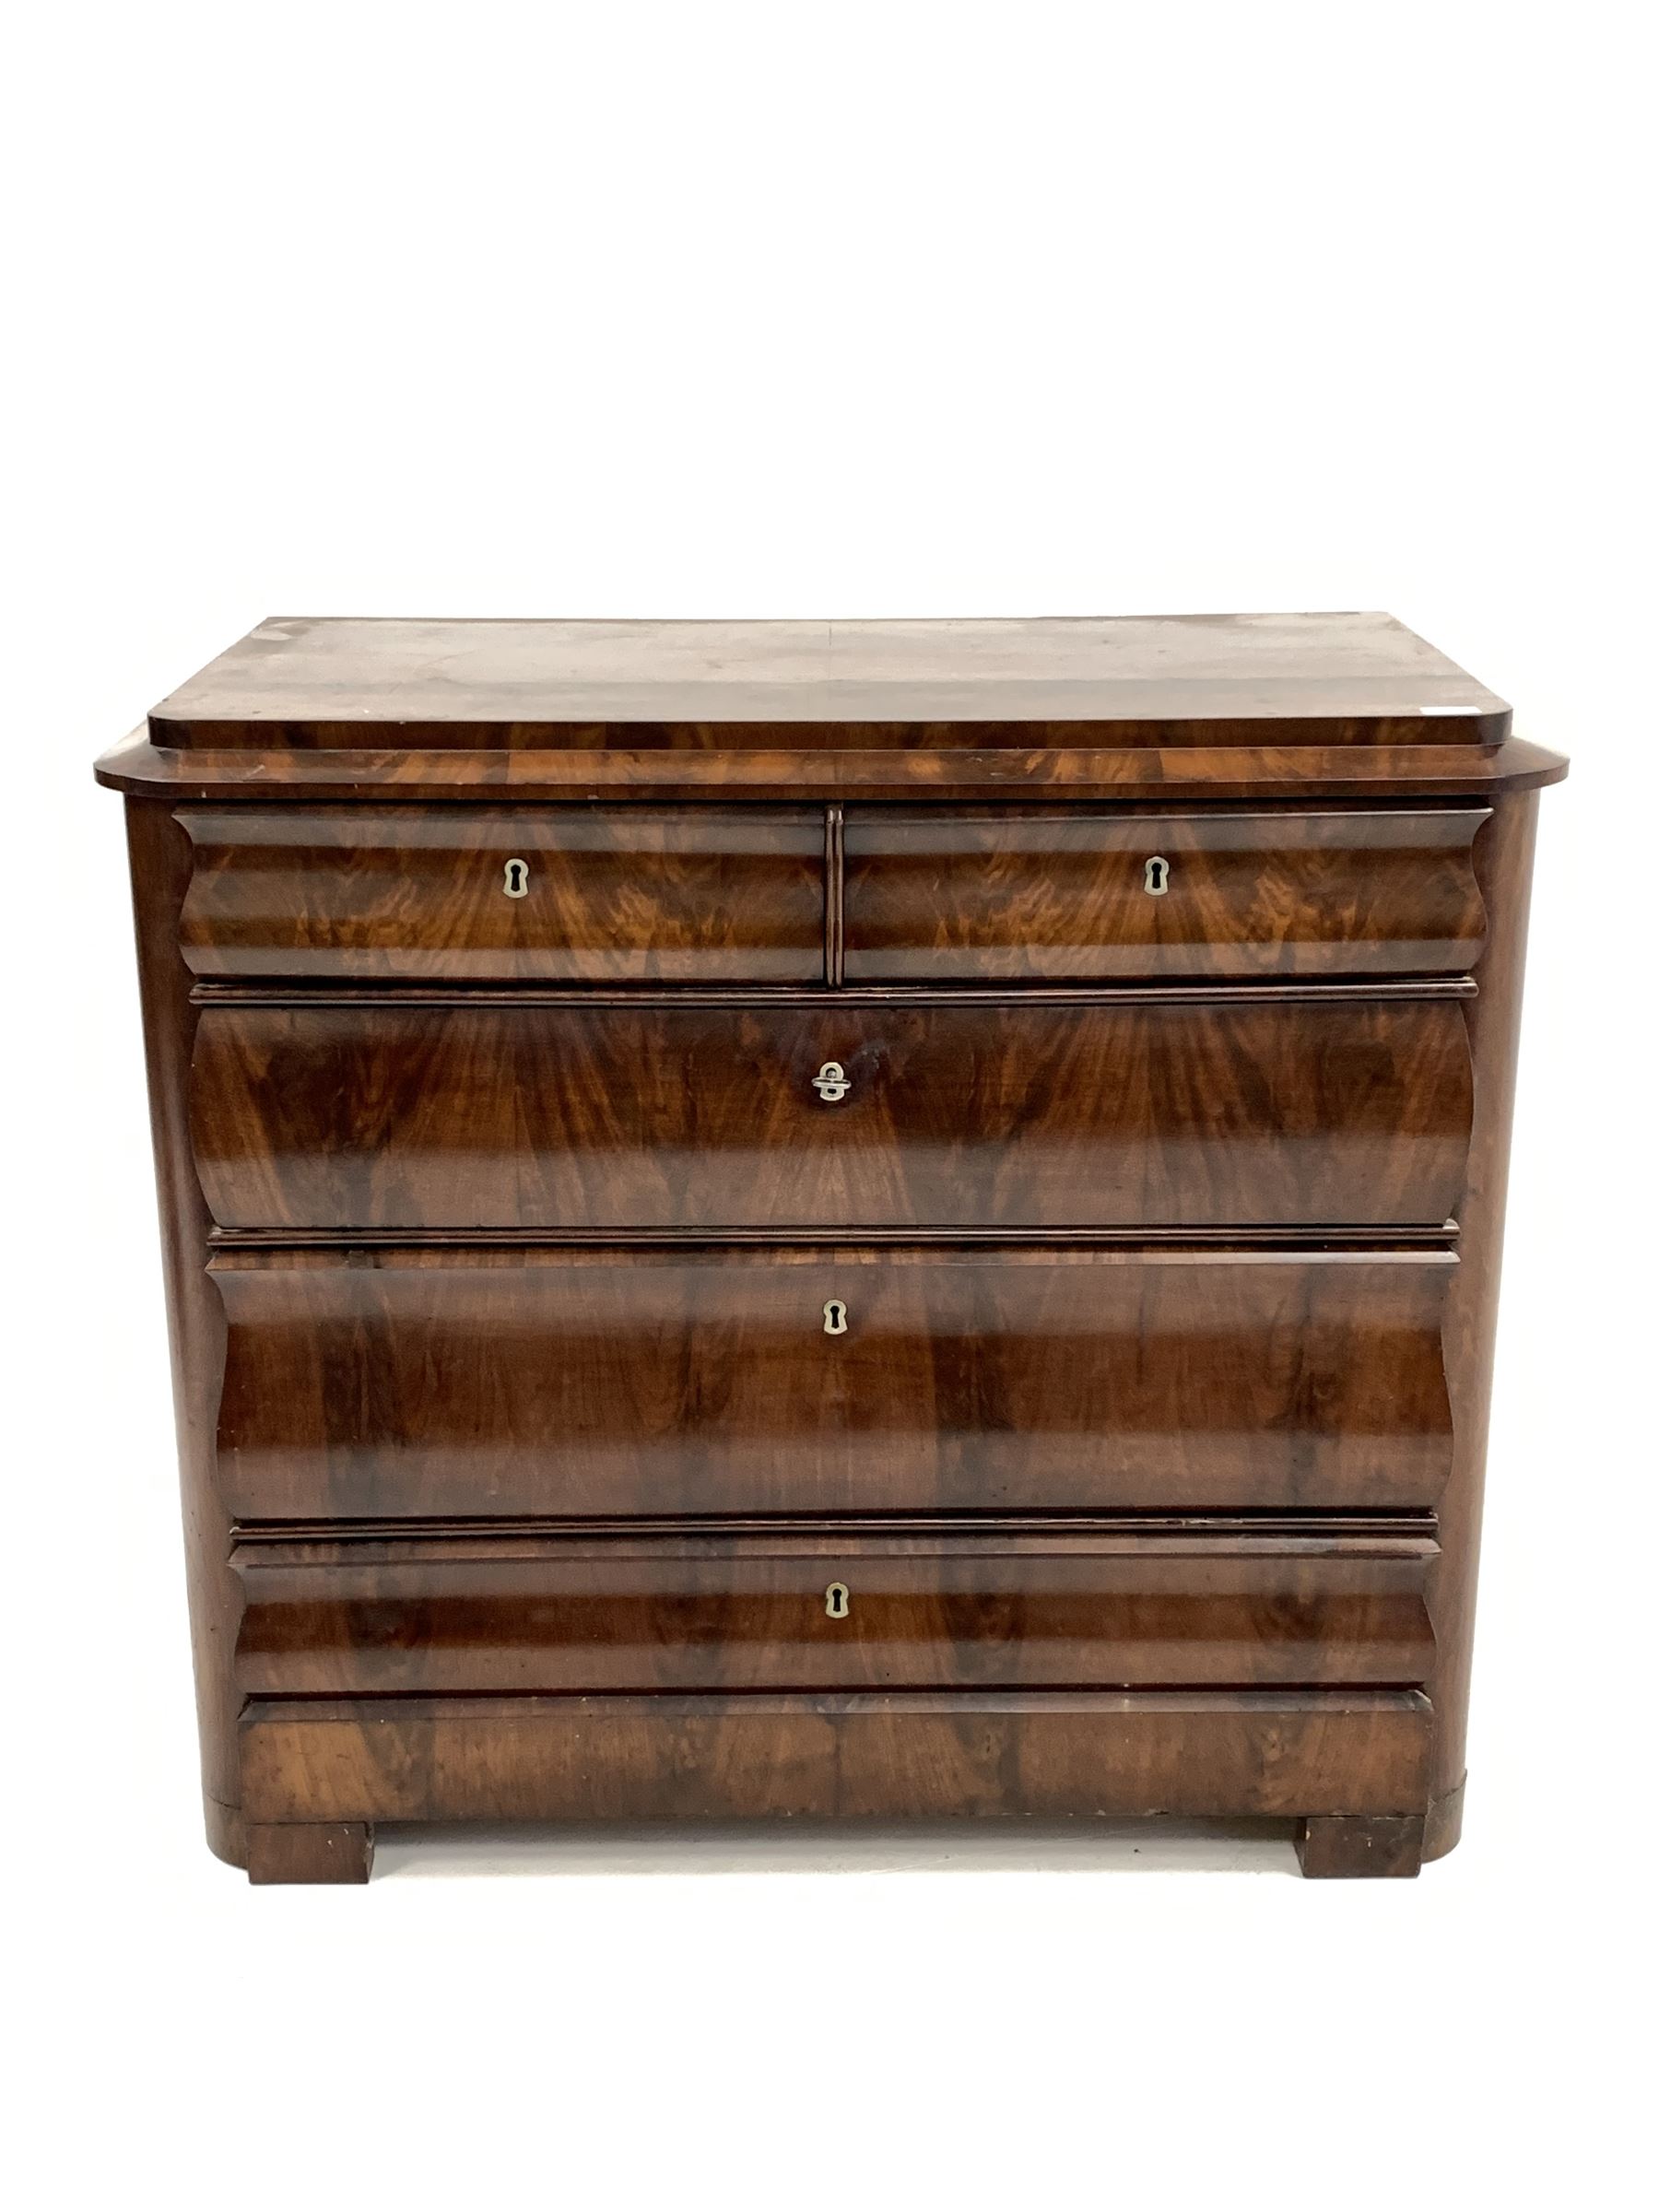 19th century continental mahogany four drawer chest